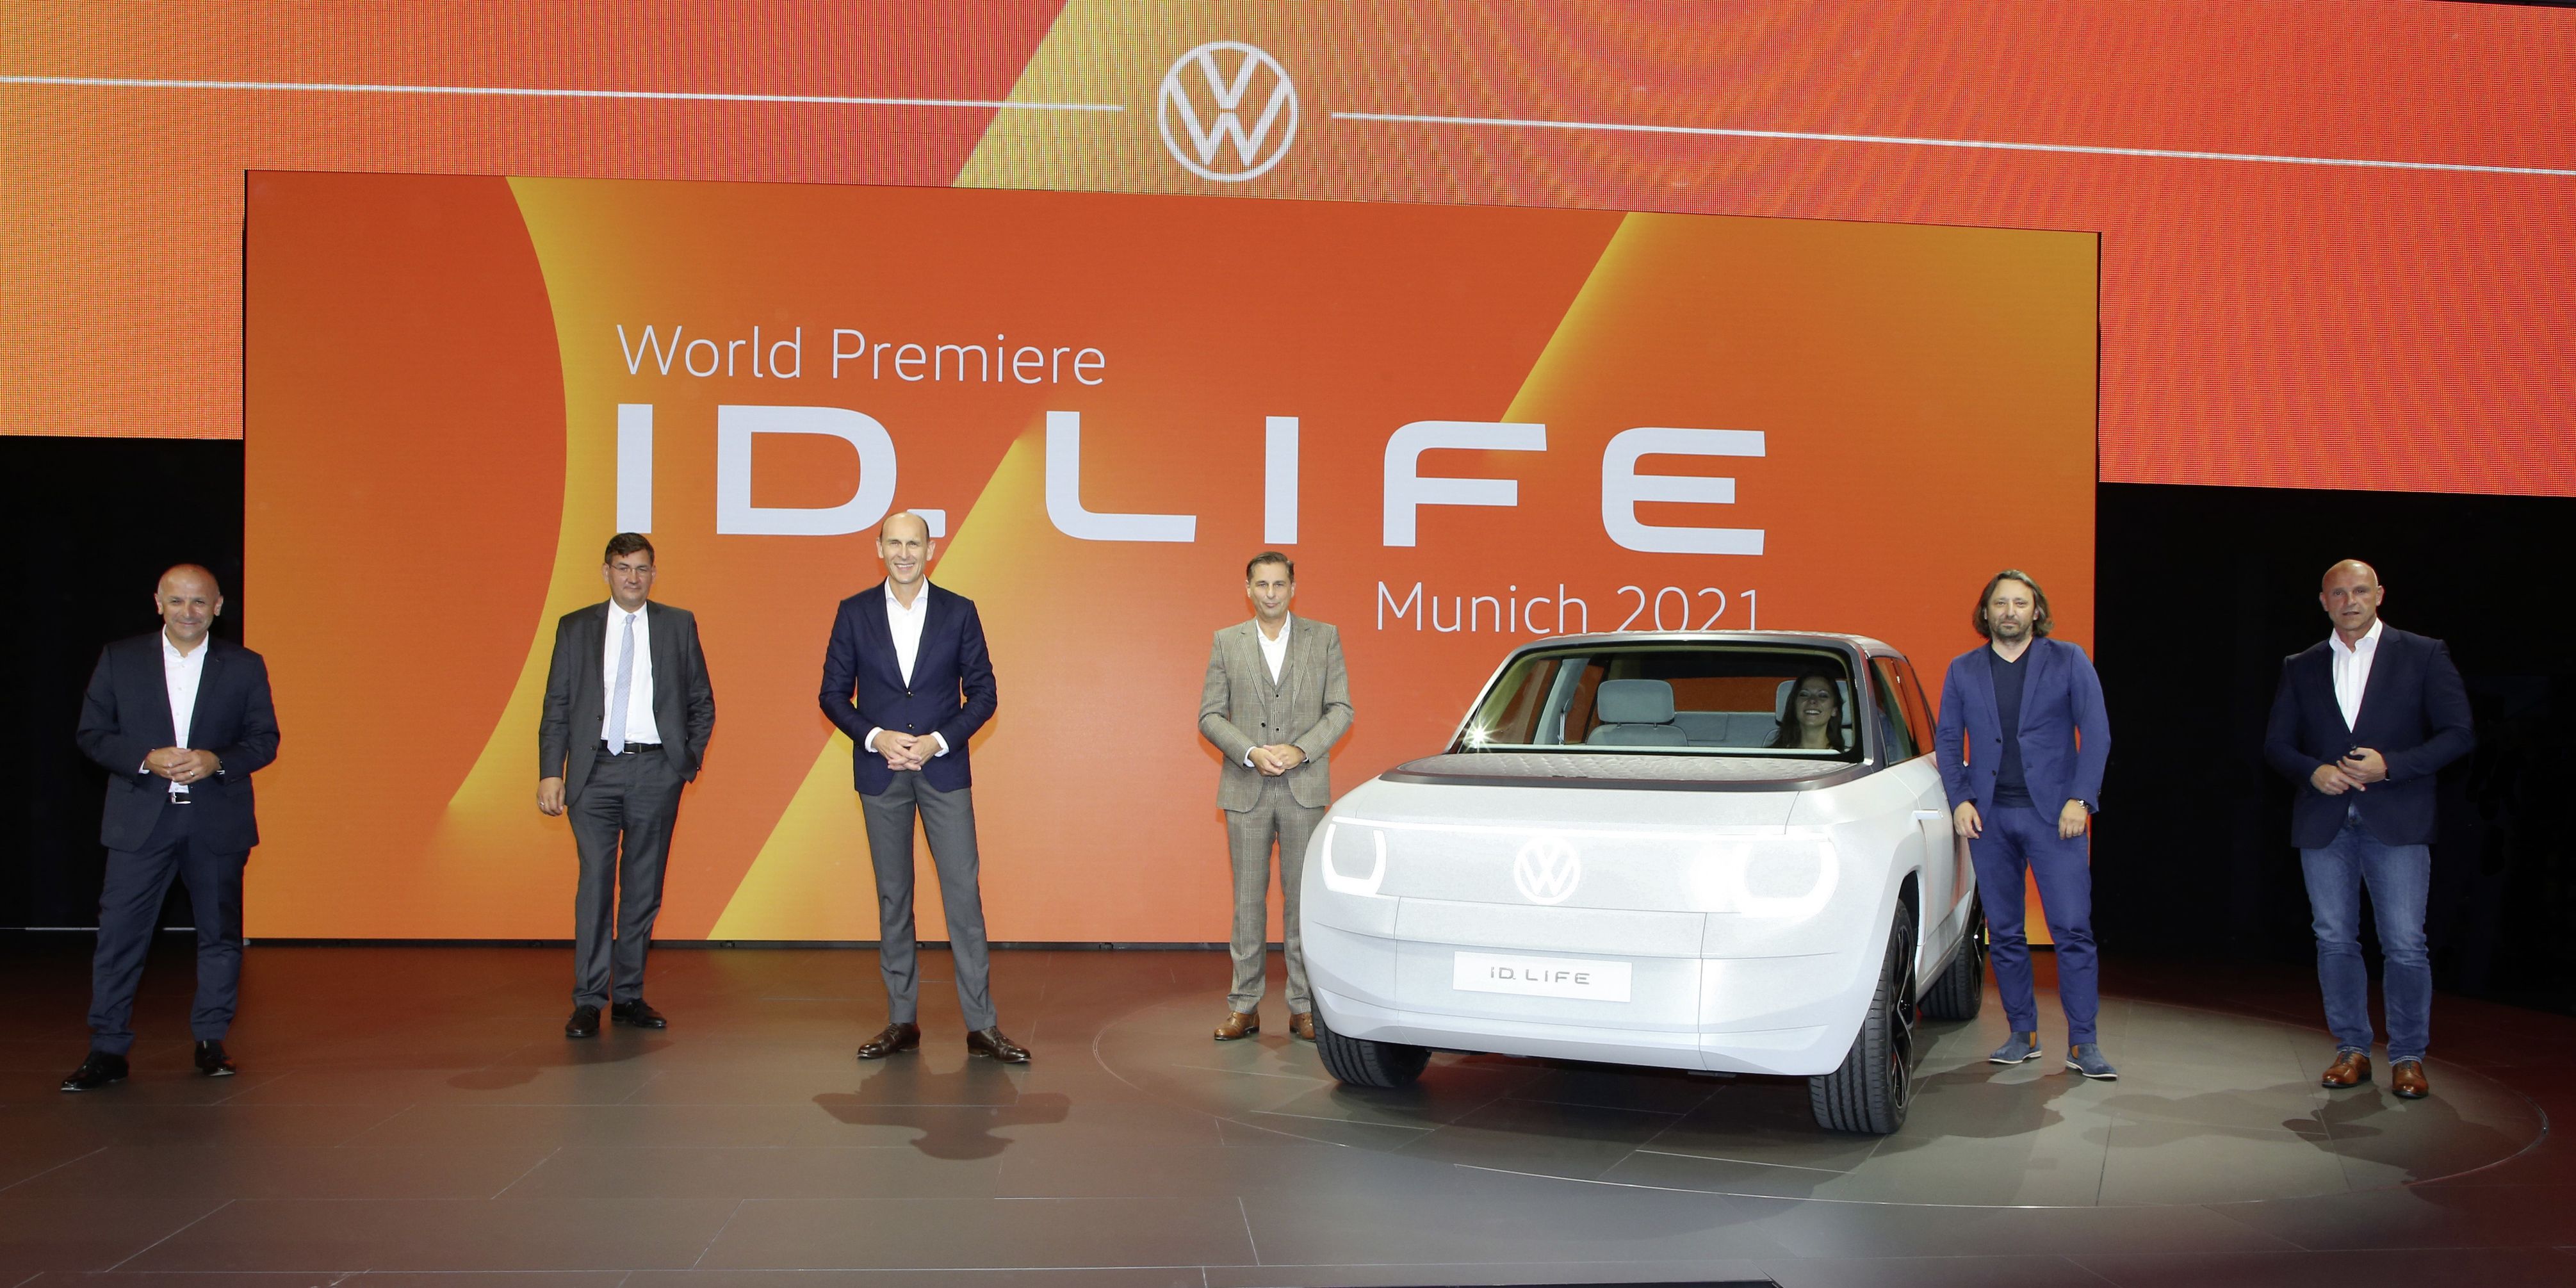 Volkswagen Is Reportedly Removing Its Design Chief